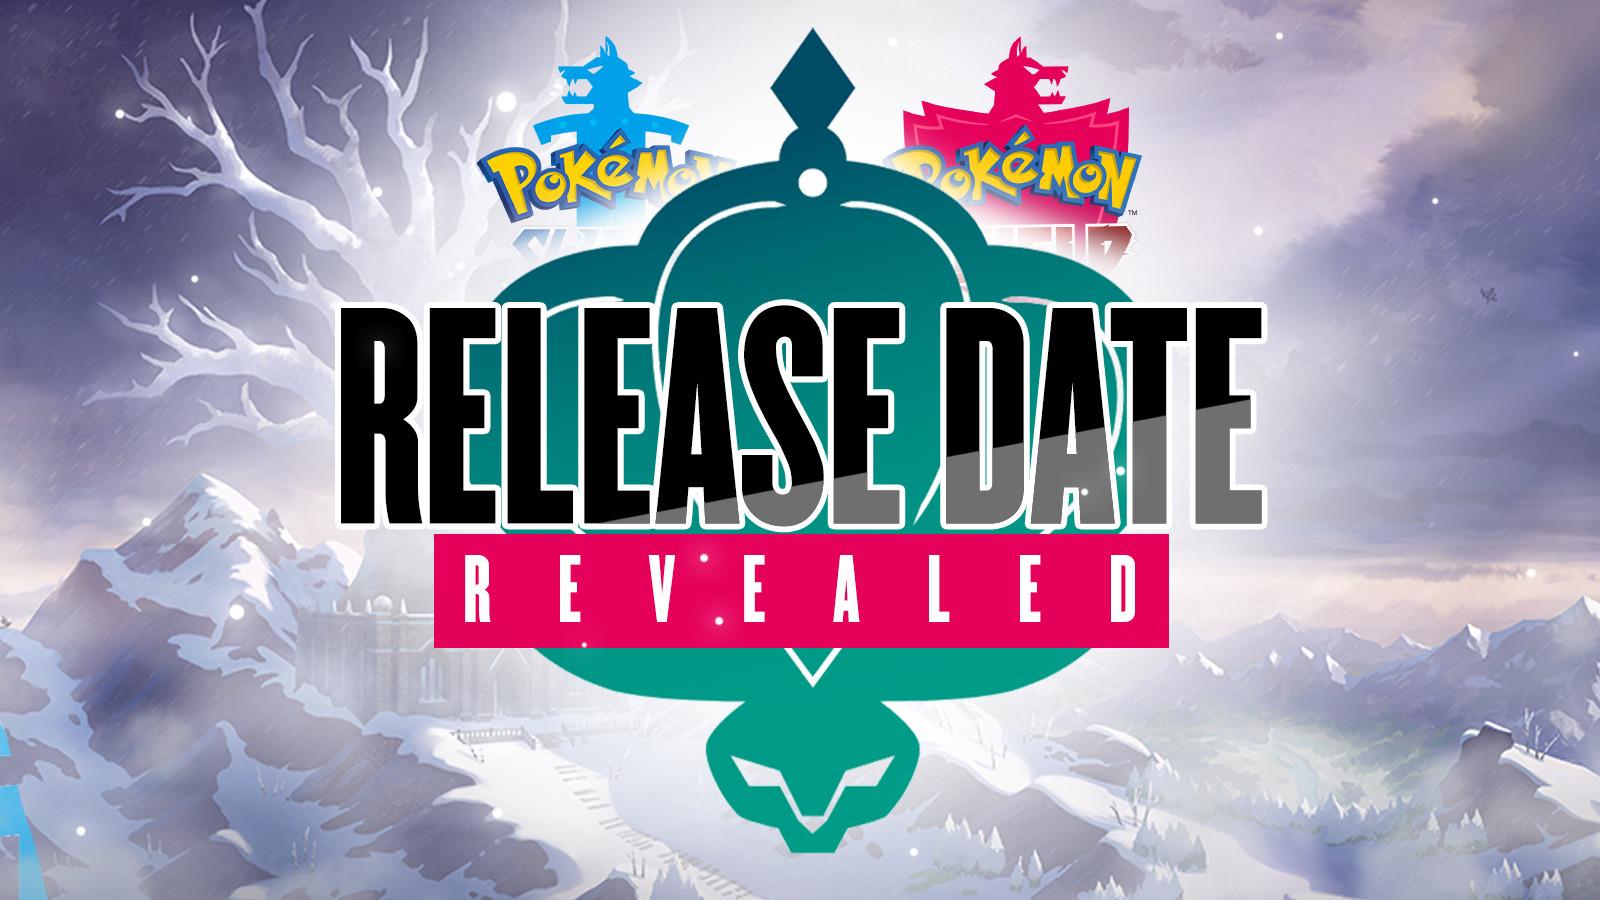 Pokemon Sword and Shield Crown Tundra DLC release date revealed